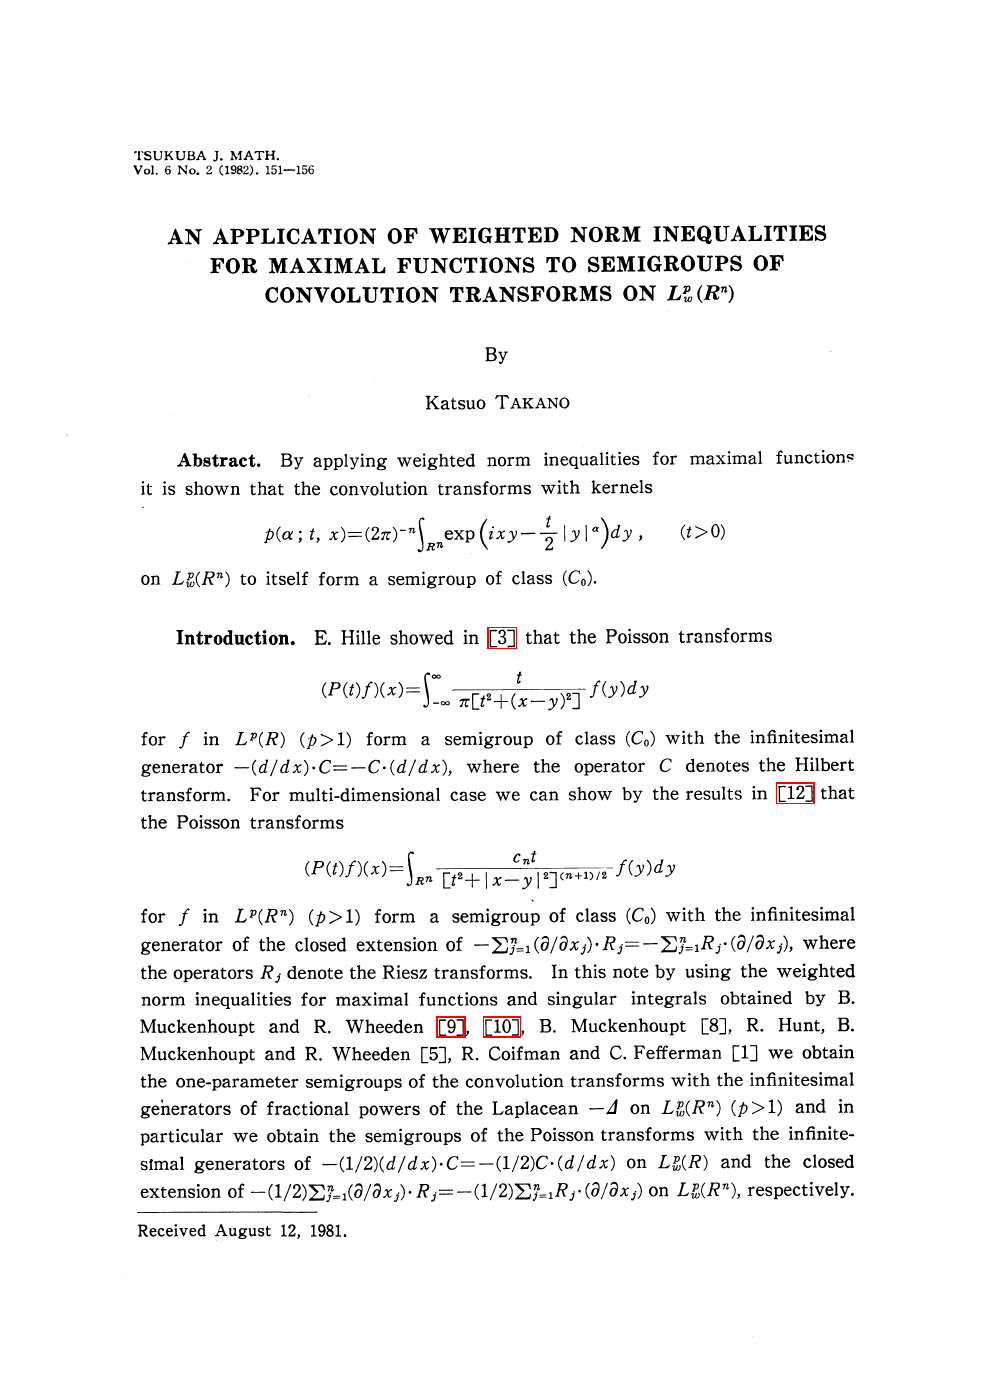 An Application Of Weighted Norm Inqualities For Maximal Functions To Semigroups Of Convolution Transforms On L P W R N Topic Of Research Paper In Mathematics Download Scholarly Article Pdf And Read For Free On